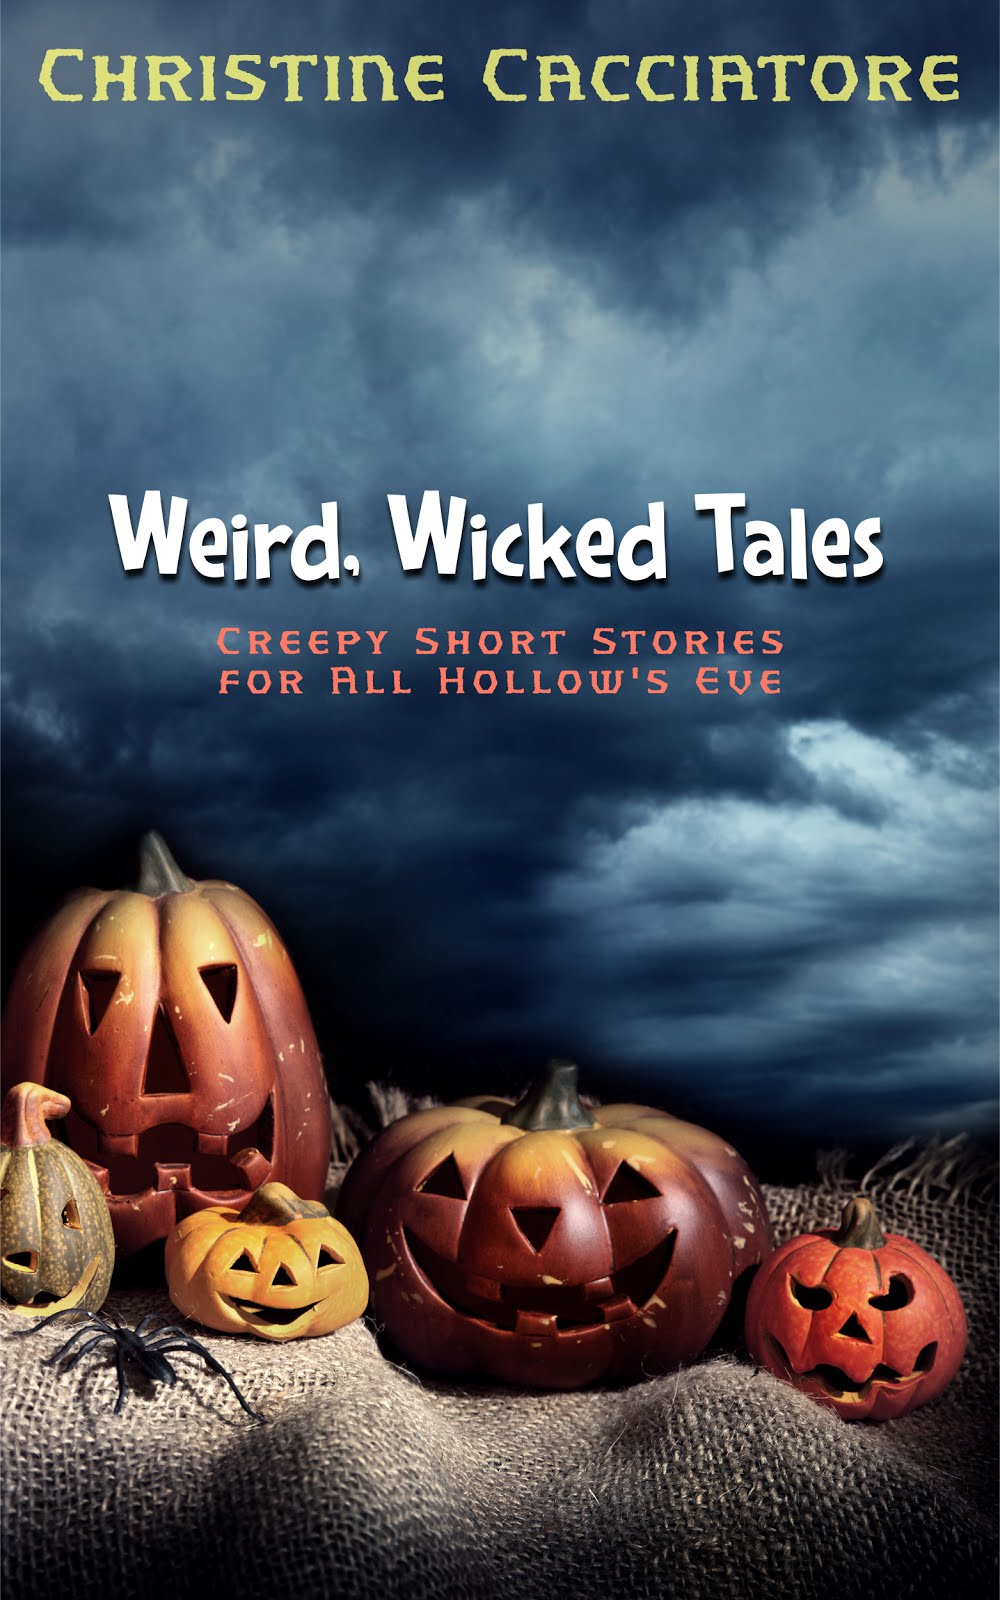 Weird, Wicked Tales...creepy short stories for All Hallow's Eve